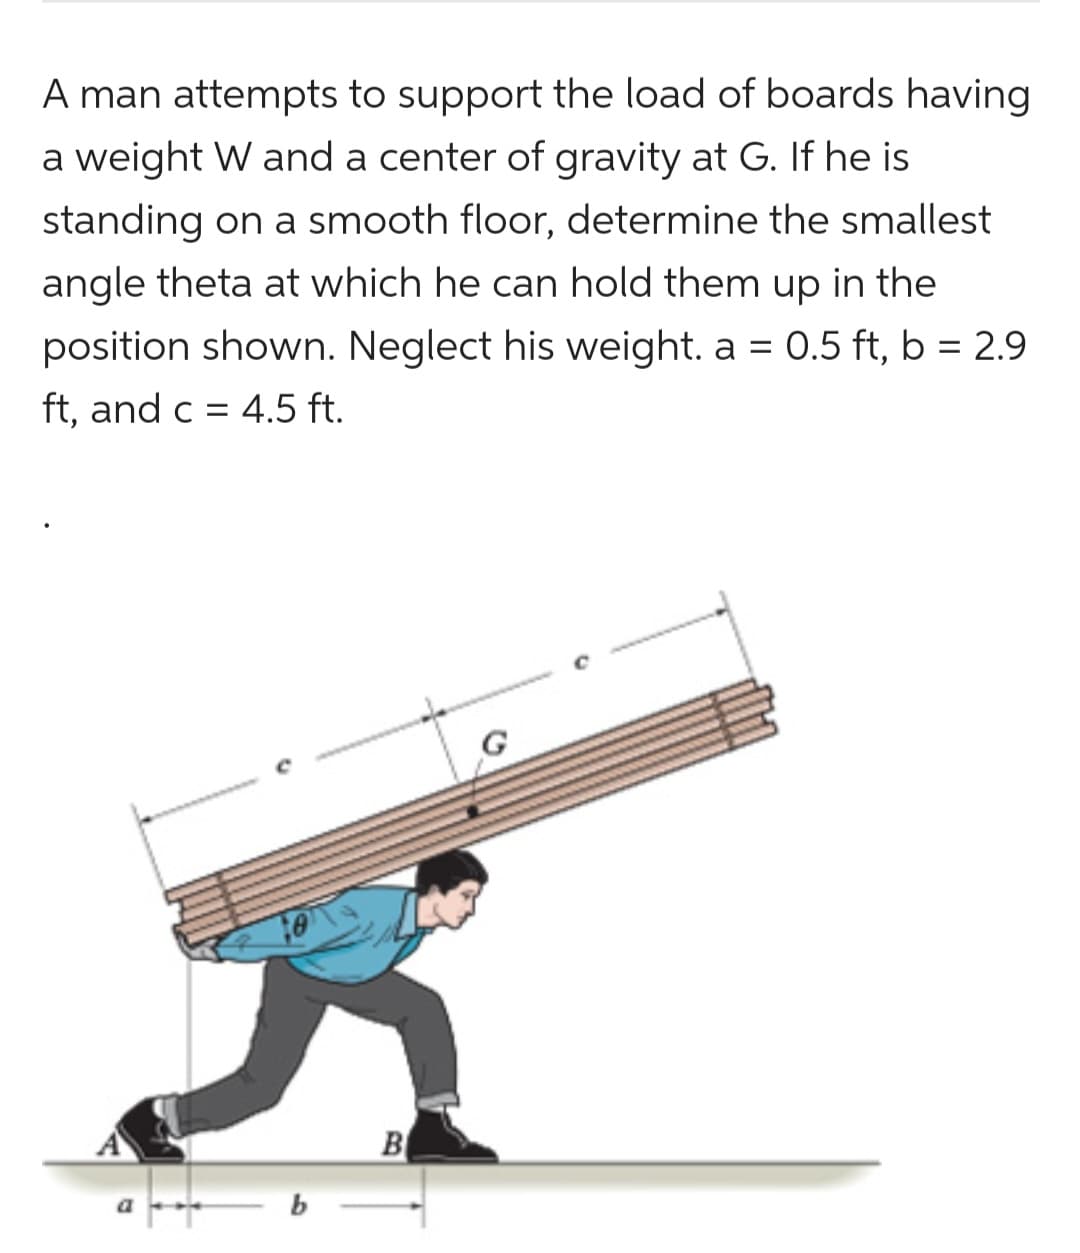 A man attempts to support the load of boards having
a weight W and a center of gravity at G. If he is
standing on a smooth floor, determine the smallest
angle theta at which he can hold them up in the
position shown. Neglect his weight. a = 0.5 ft, b = 2.9
ft, and c = 4.5 ft.
B